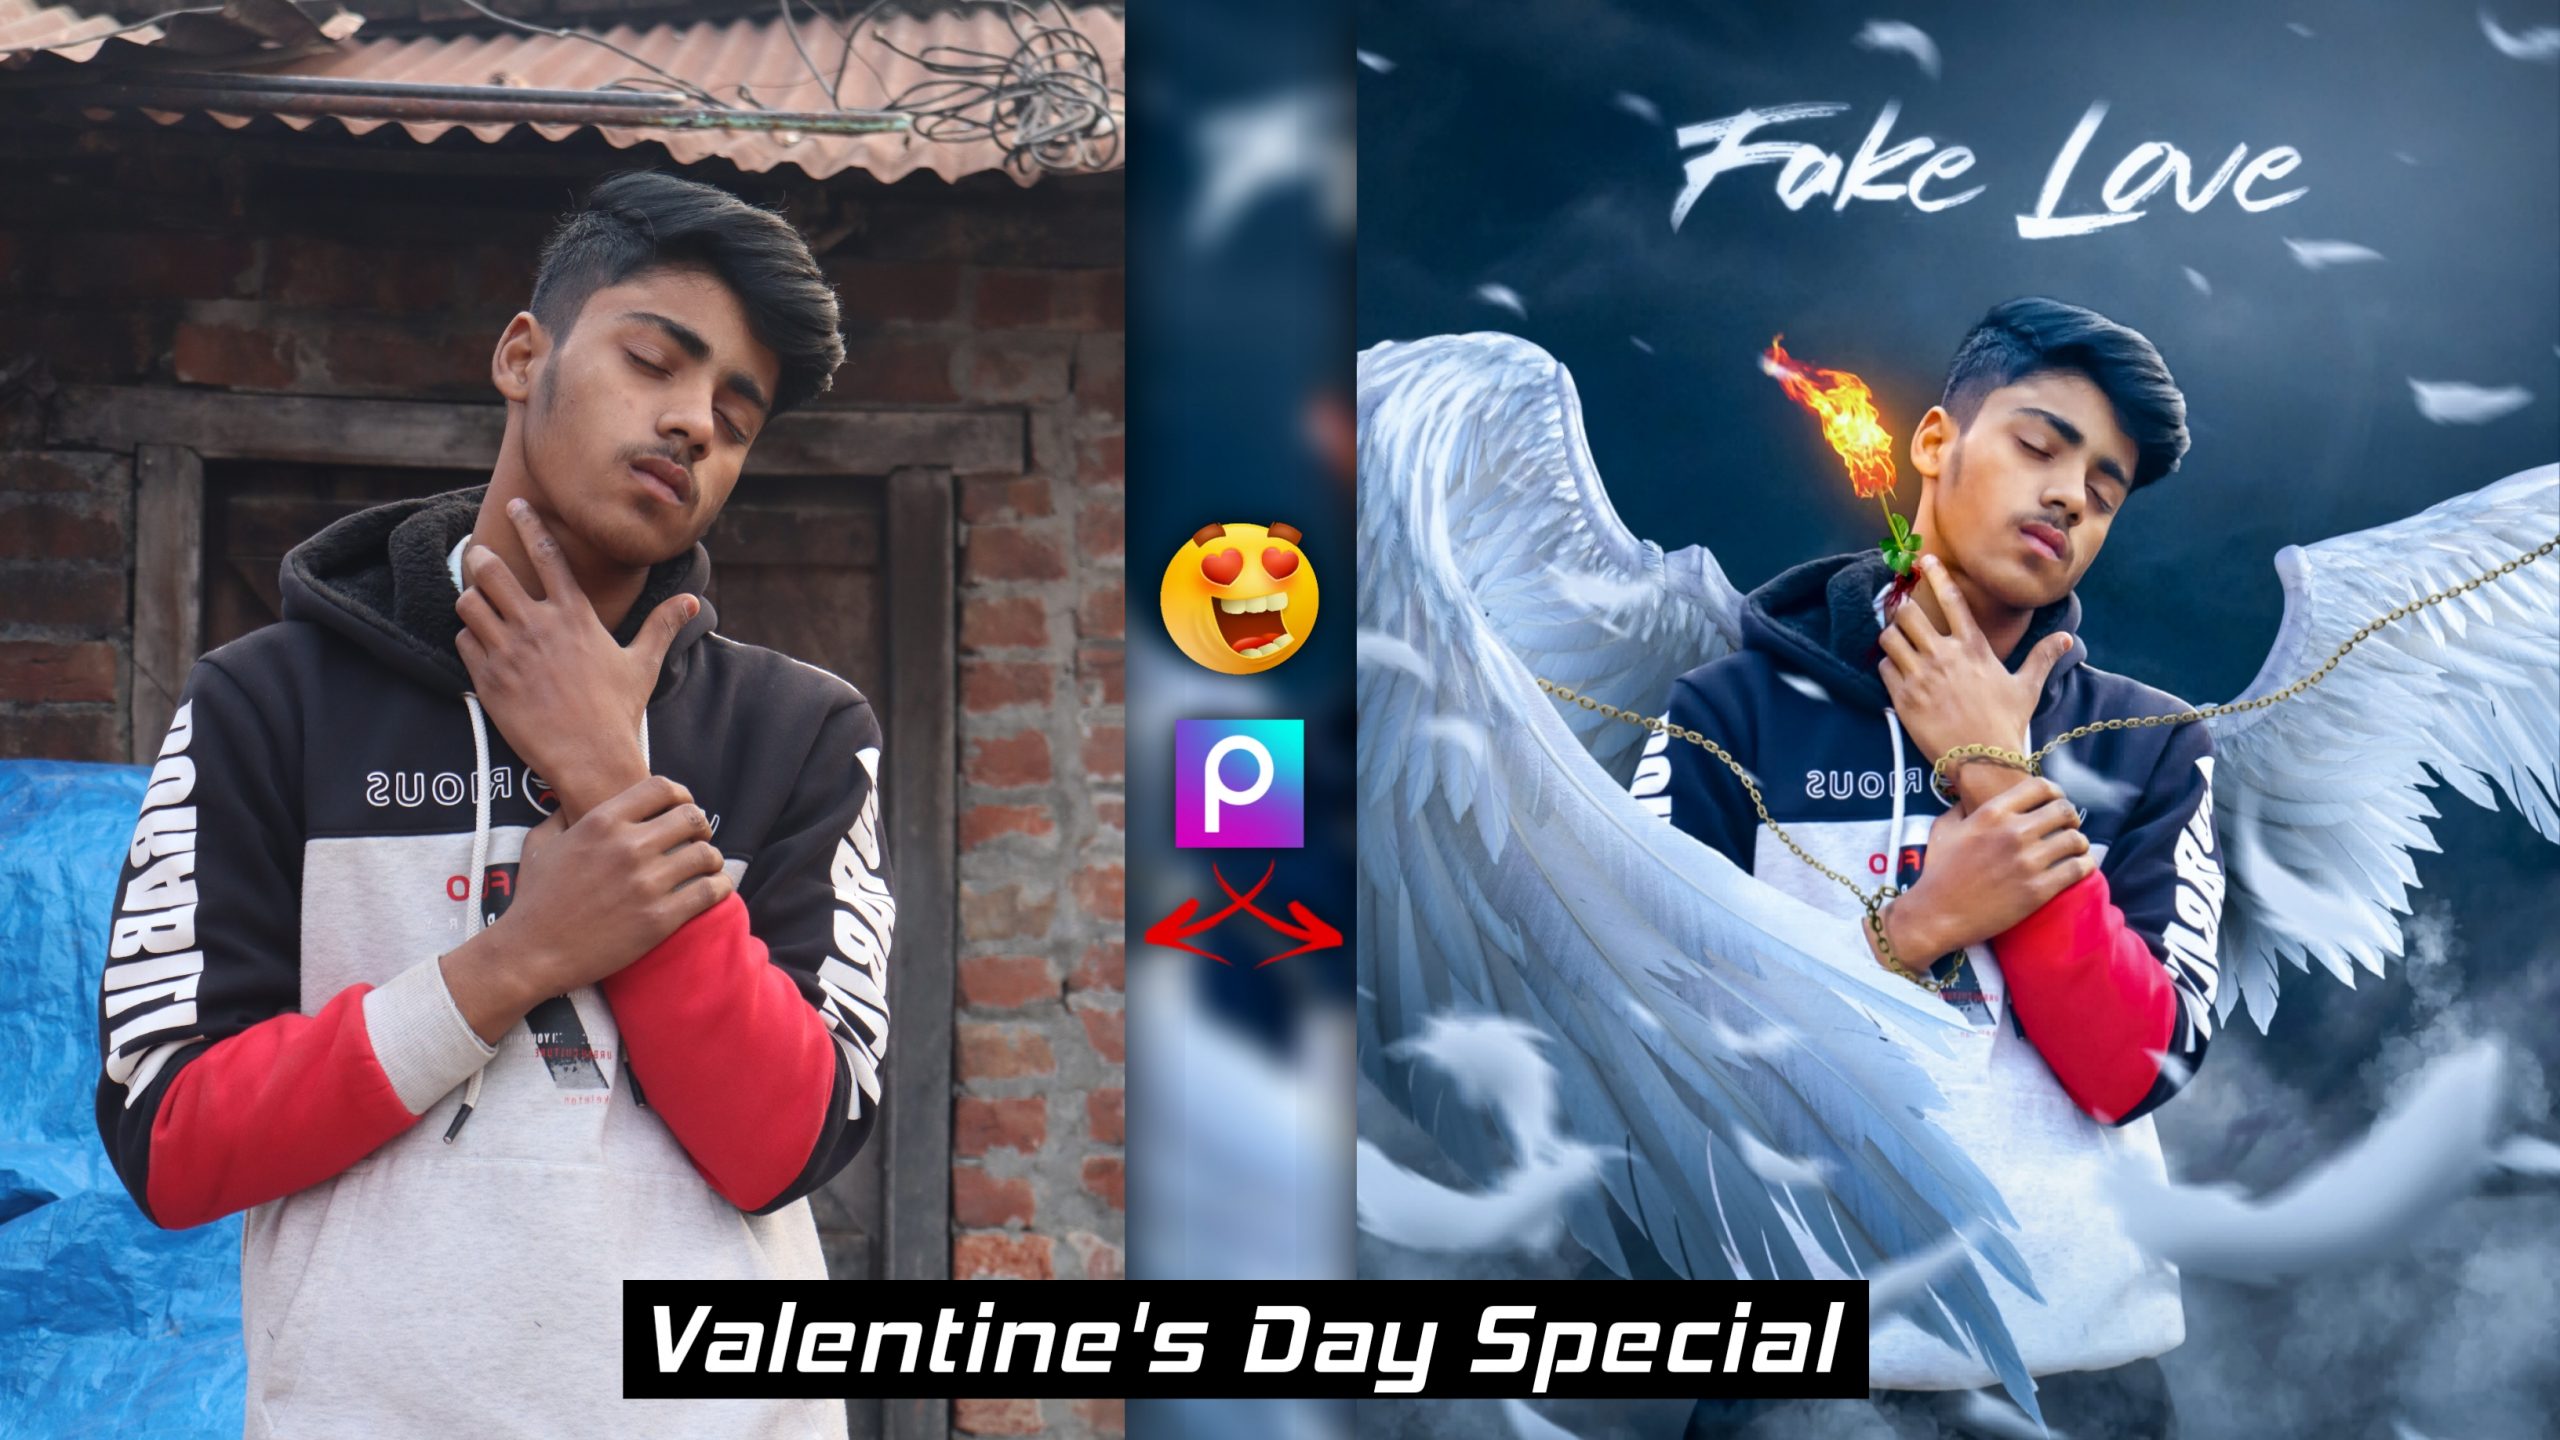 Fake love photo editing by learningwithsr 2020 Vijay mahar fake love photo  editing  LEARNINGWITHSR